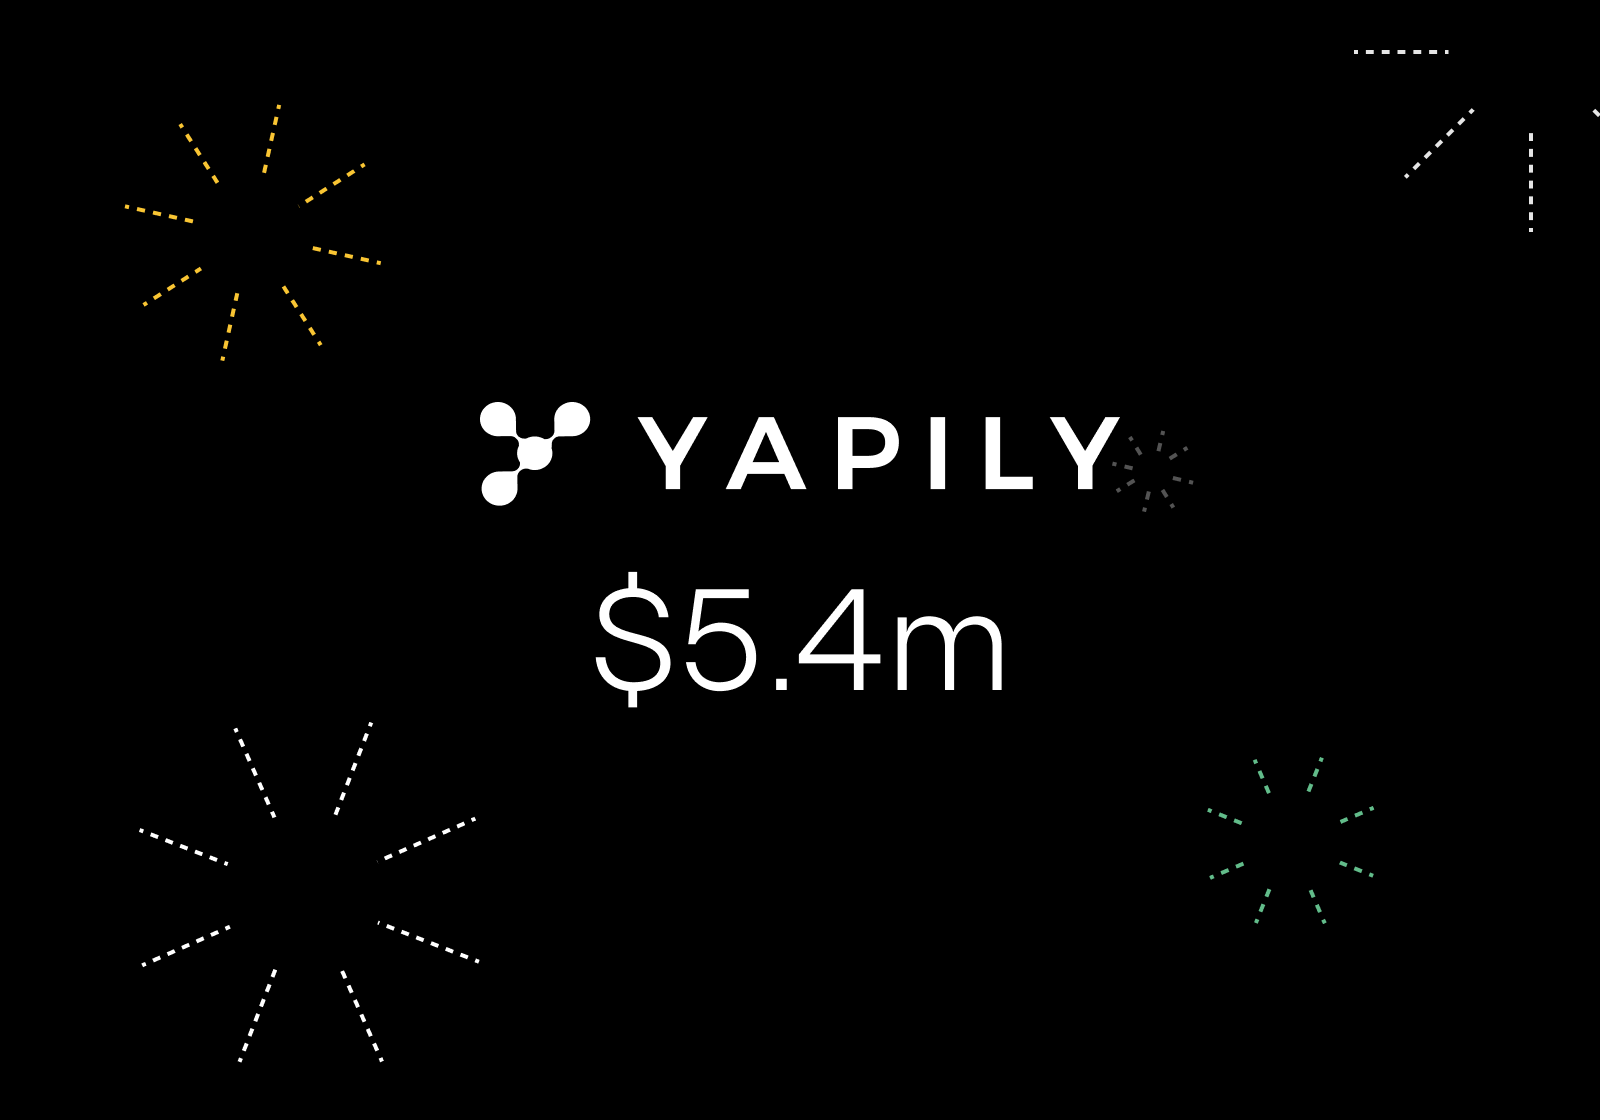 London-based open banking fintech Yapily announced it has raised $5.4m in seed funding to help develop its API platform.